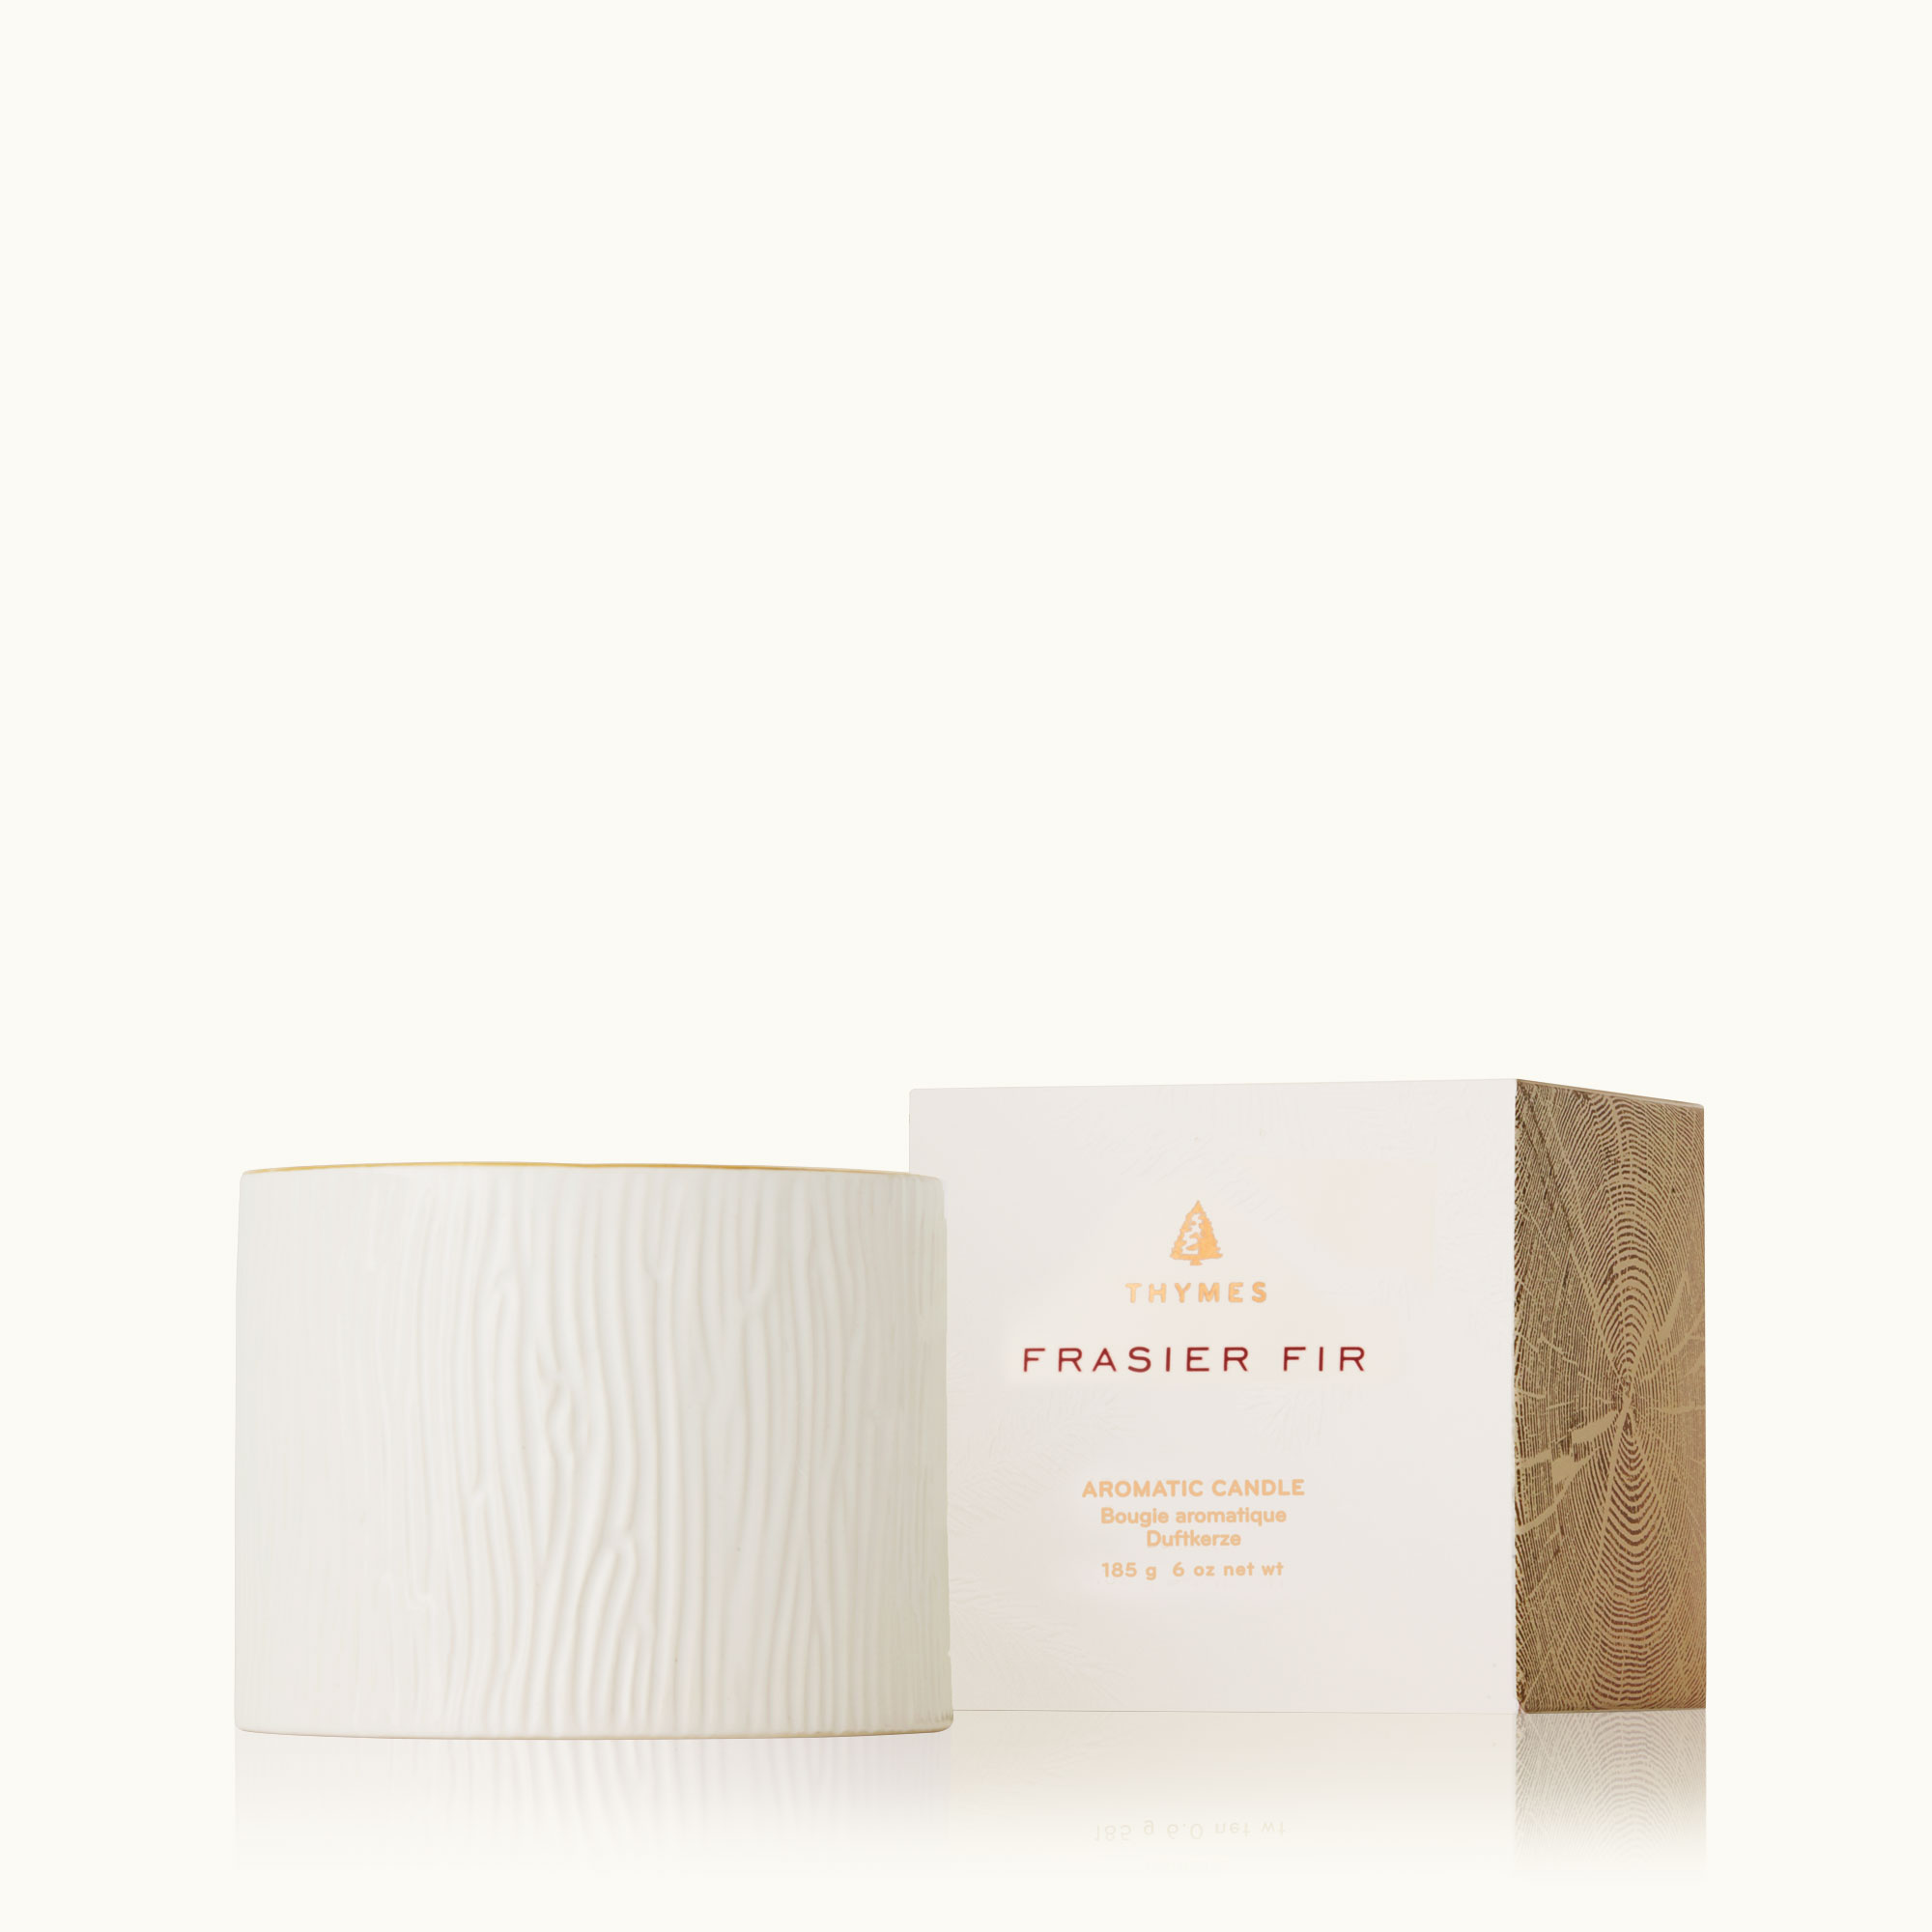 Thymes Frasier Fir Petite Molded Pinecone Candle, TH03505244400